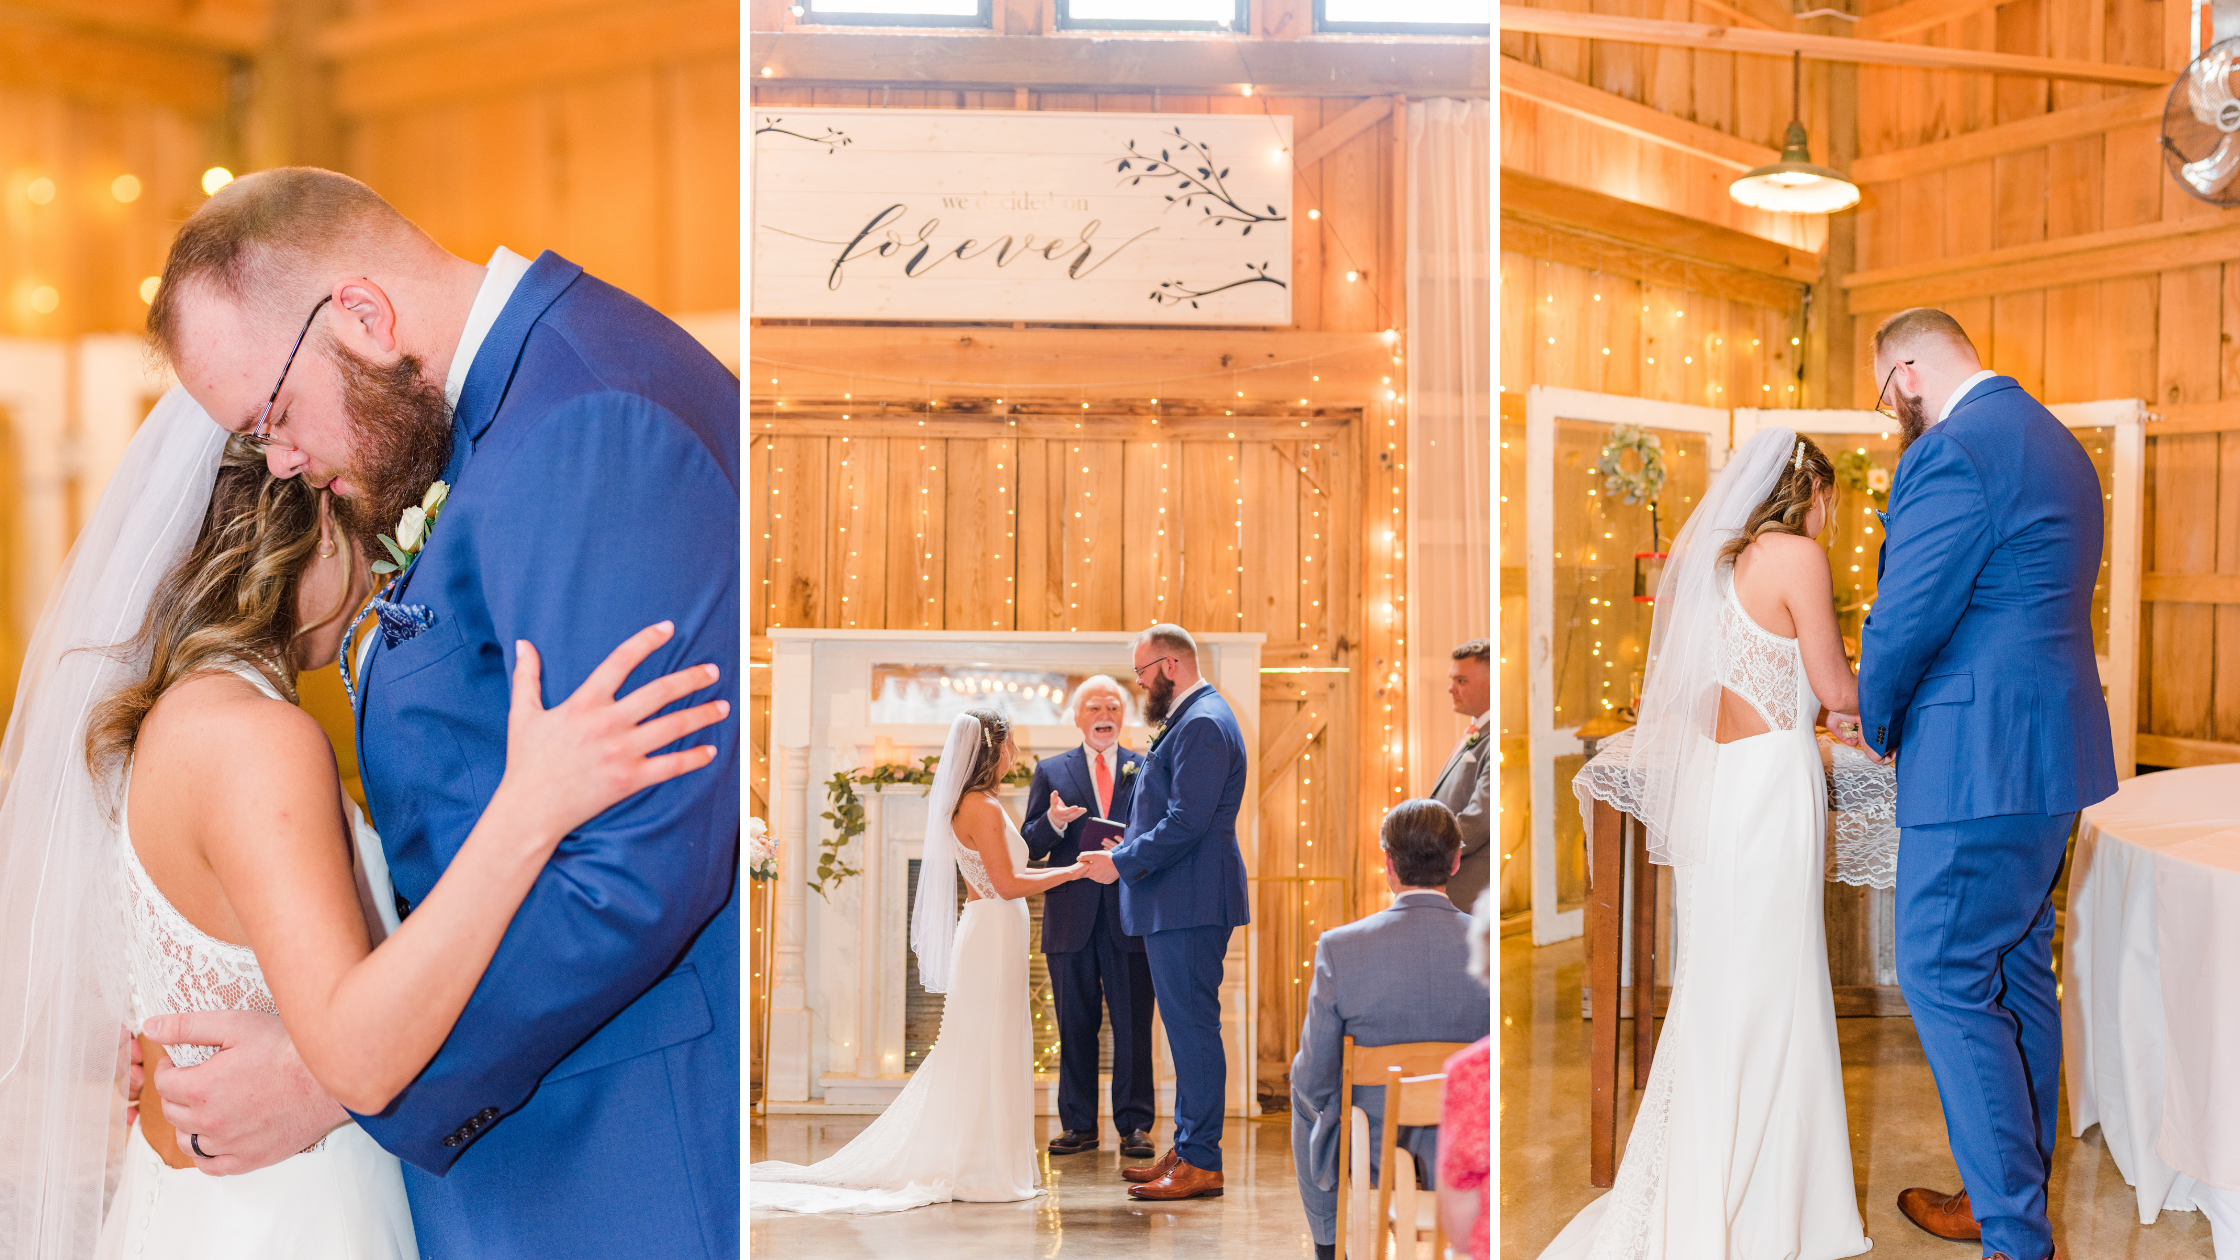 Kalioka Stables Wedding in Alabama Photography Photographed by Kristen Marcus Photography